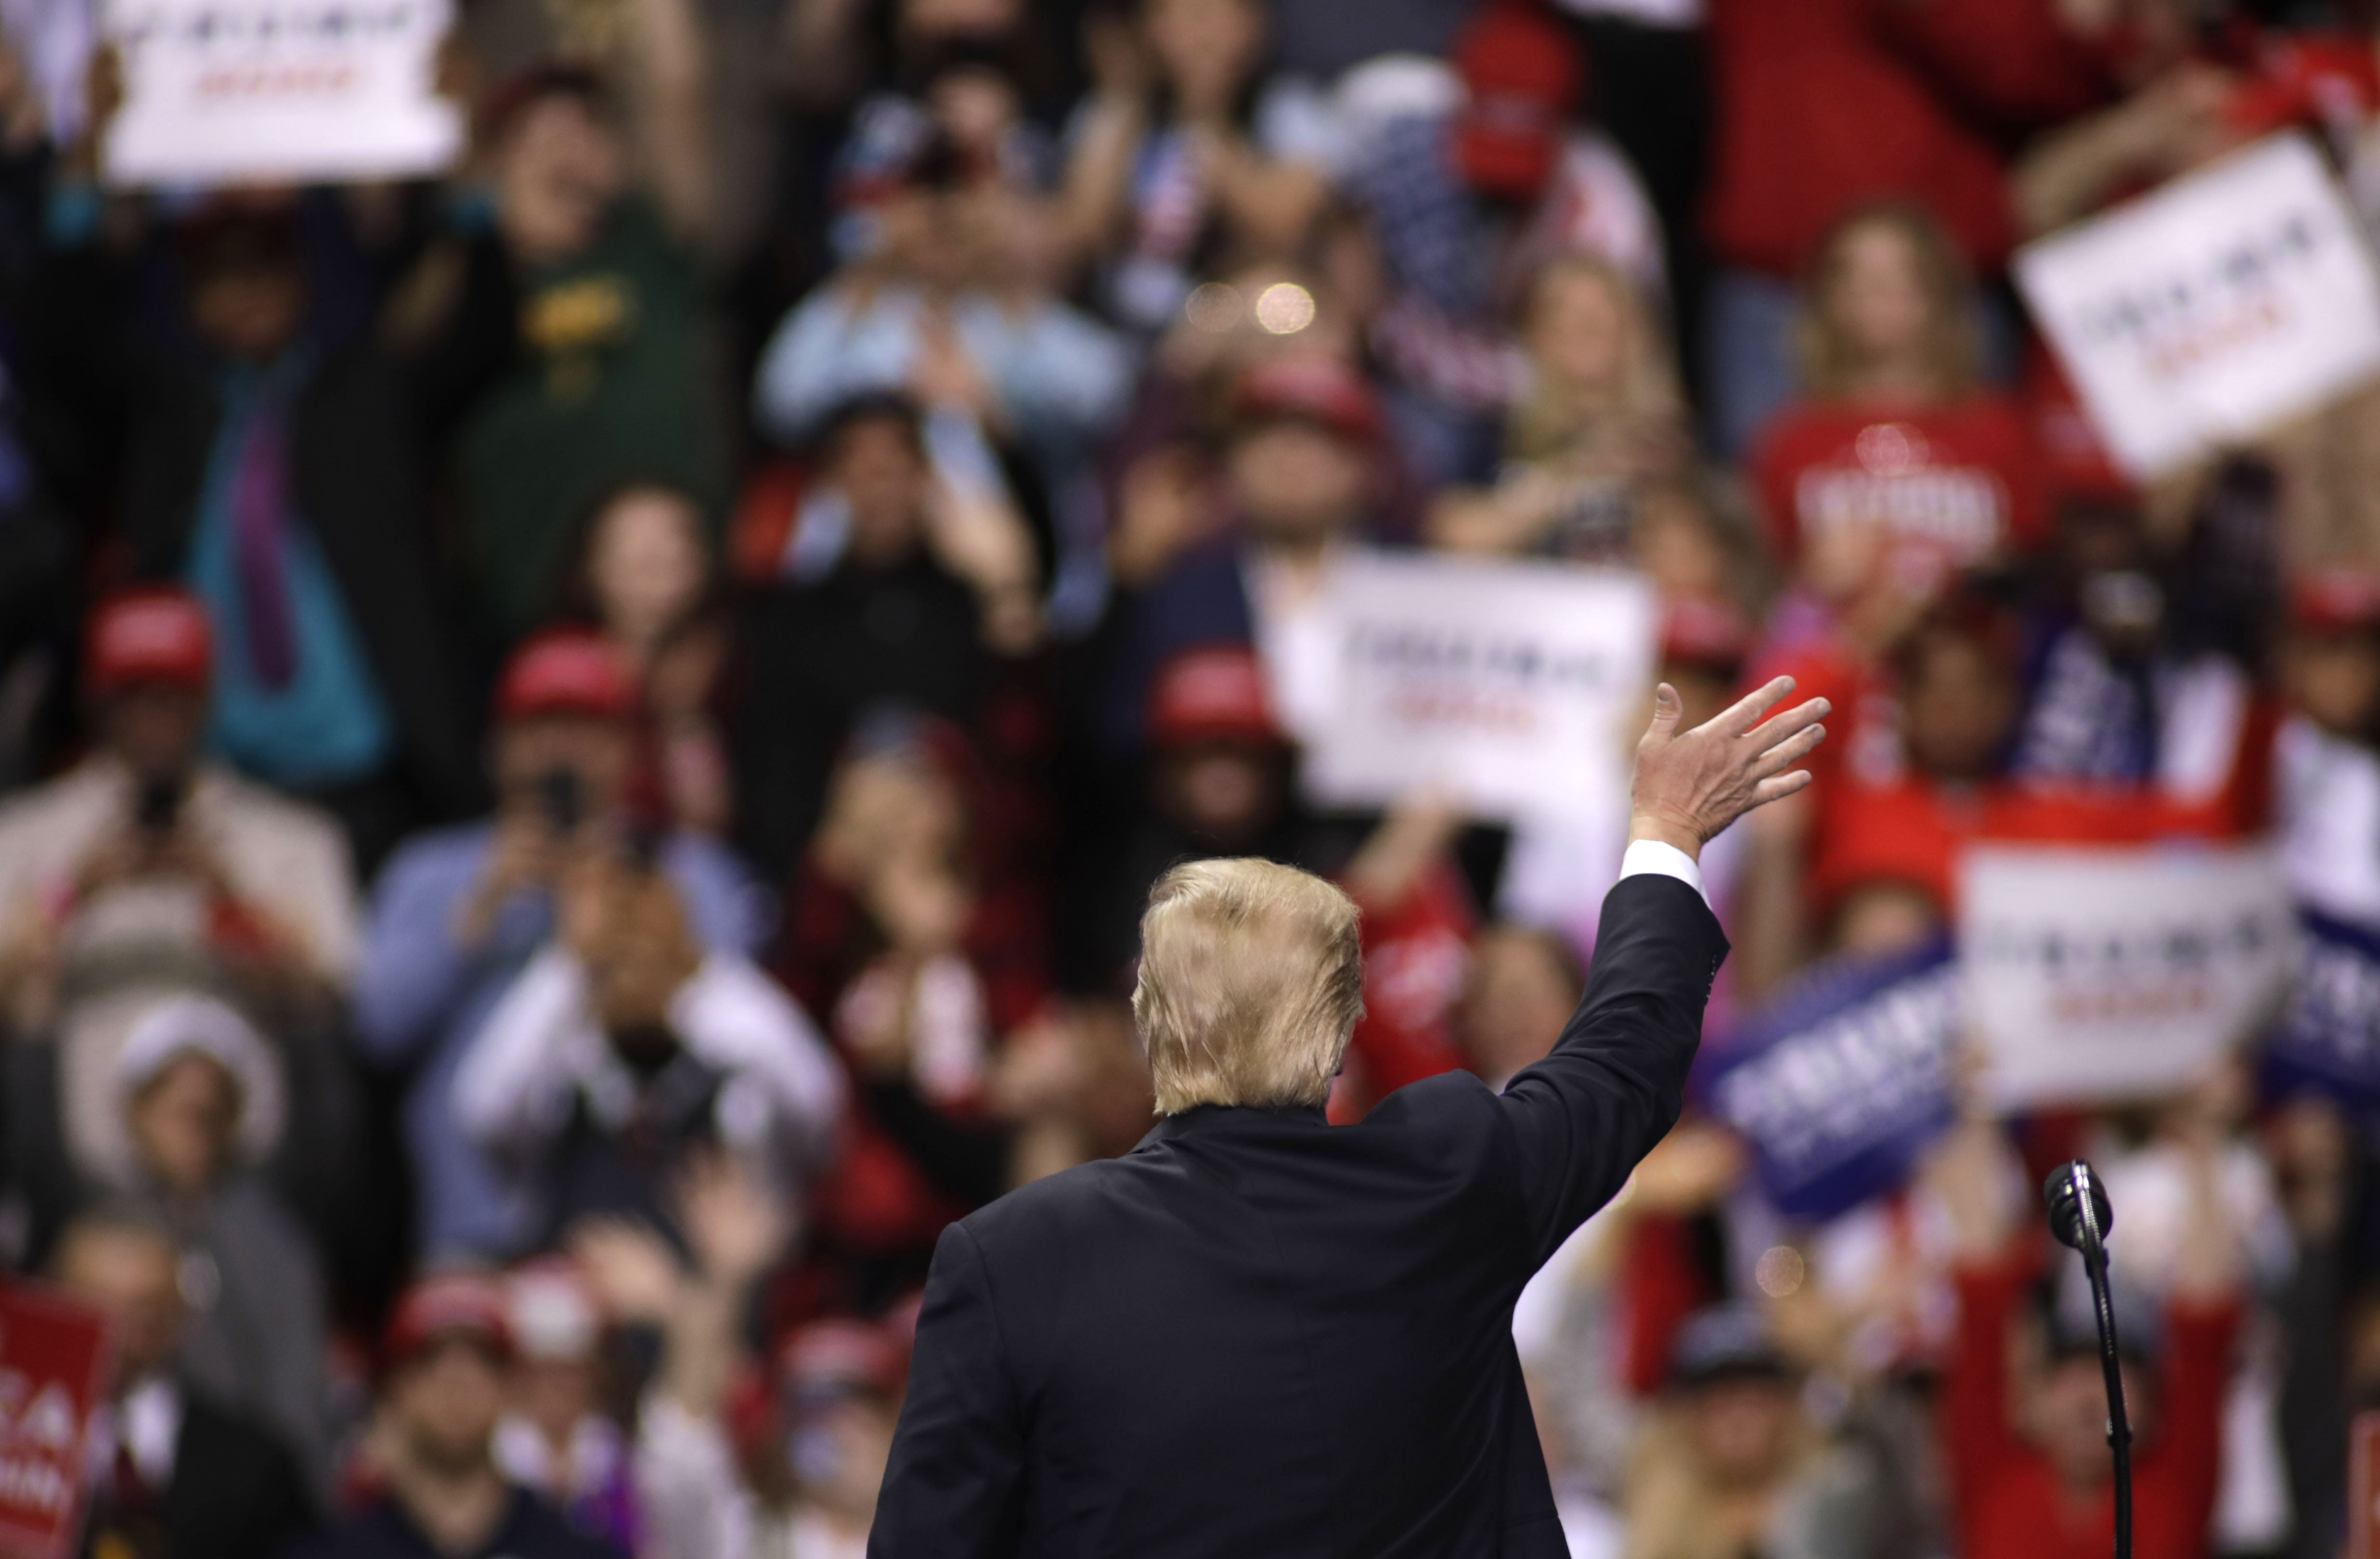 GREEN BAY, WI - APRIL 27: US President Donald Trump waves to the crowd after speaking to a crowd of supporters at a Make America Great Again rally on April 27, 2019 in Green Bay, Wisconsin. (Photo by Darren Hauck/Getty Images)